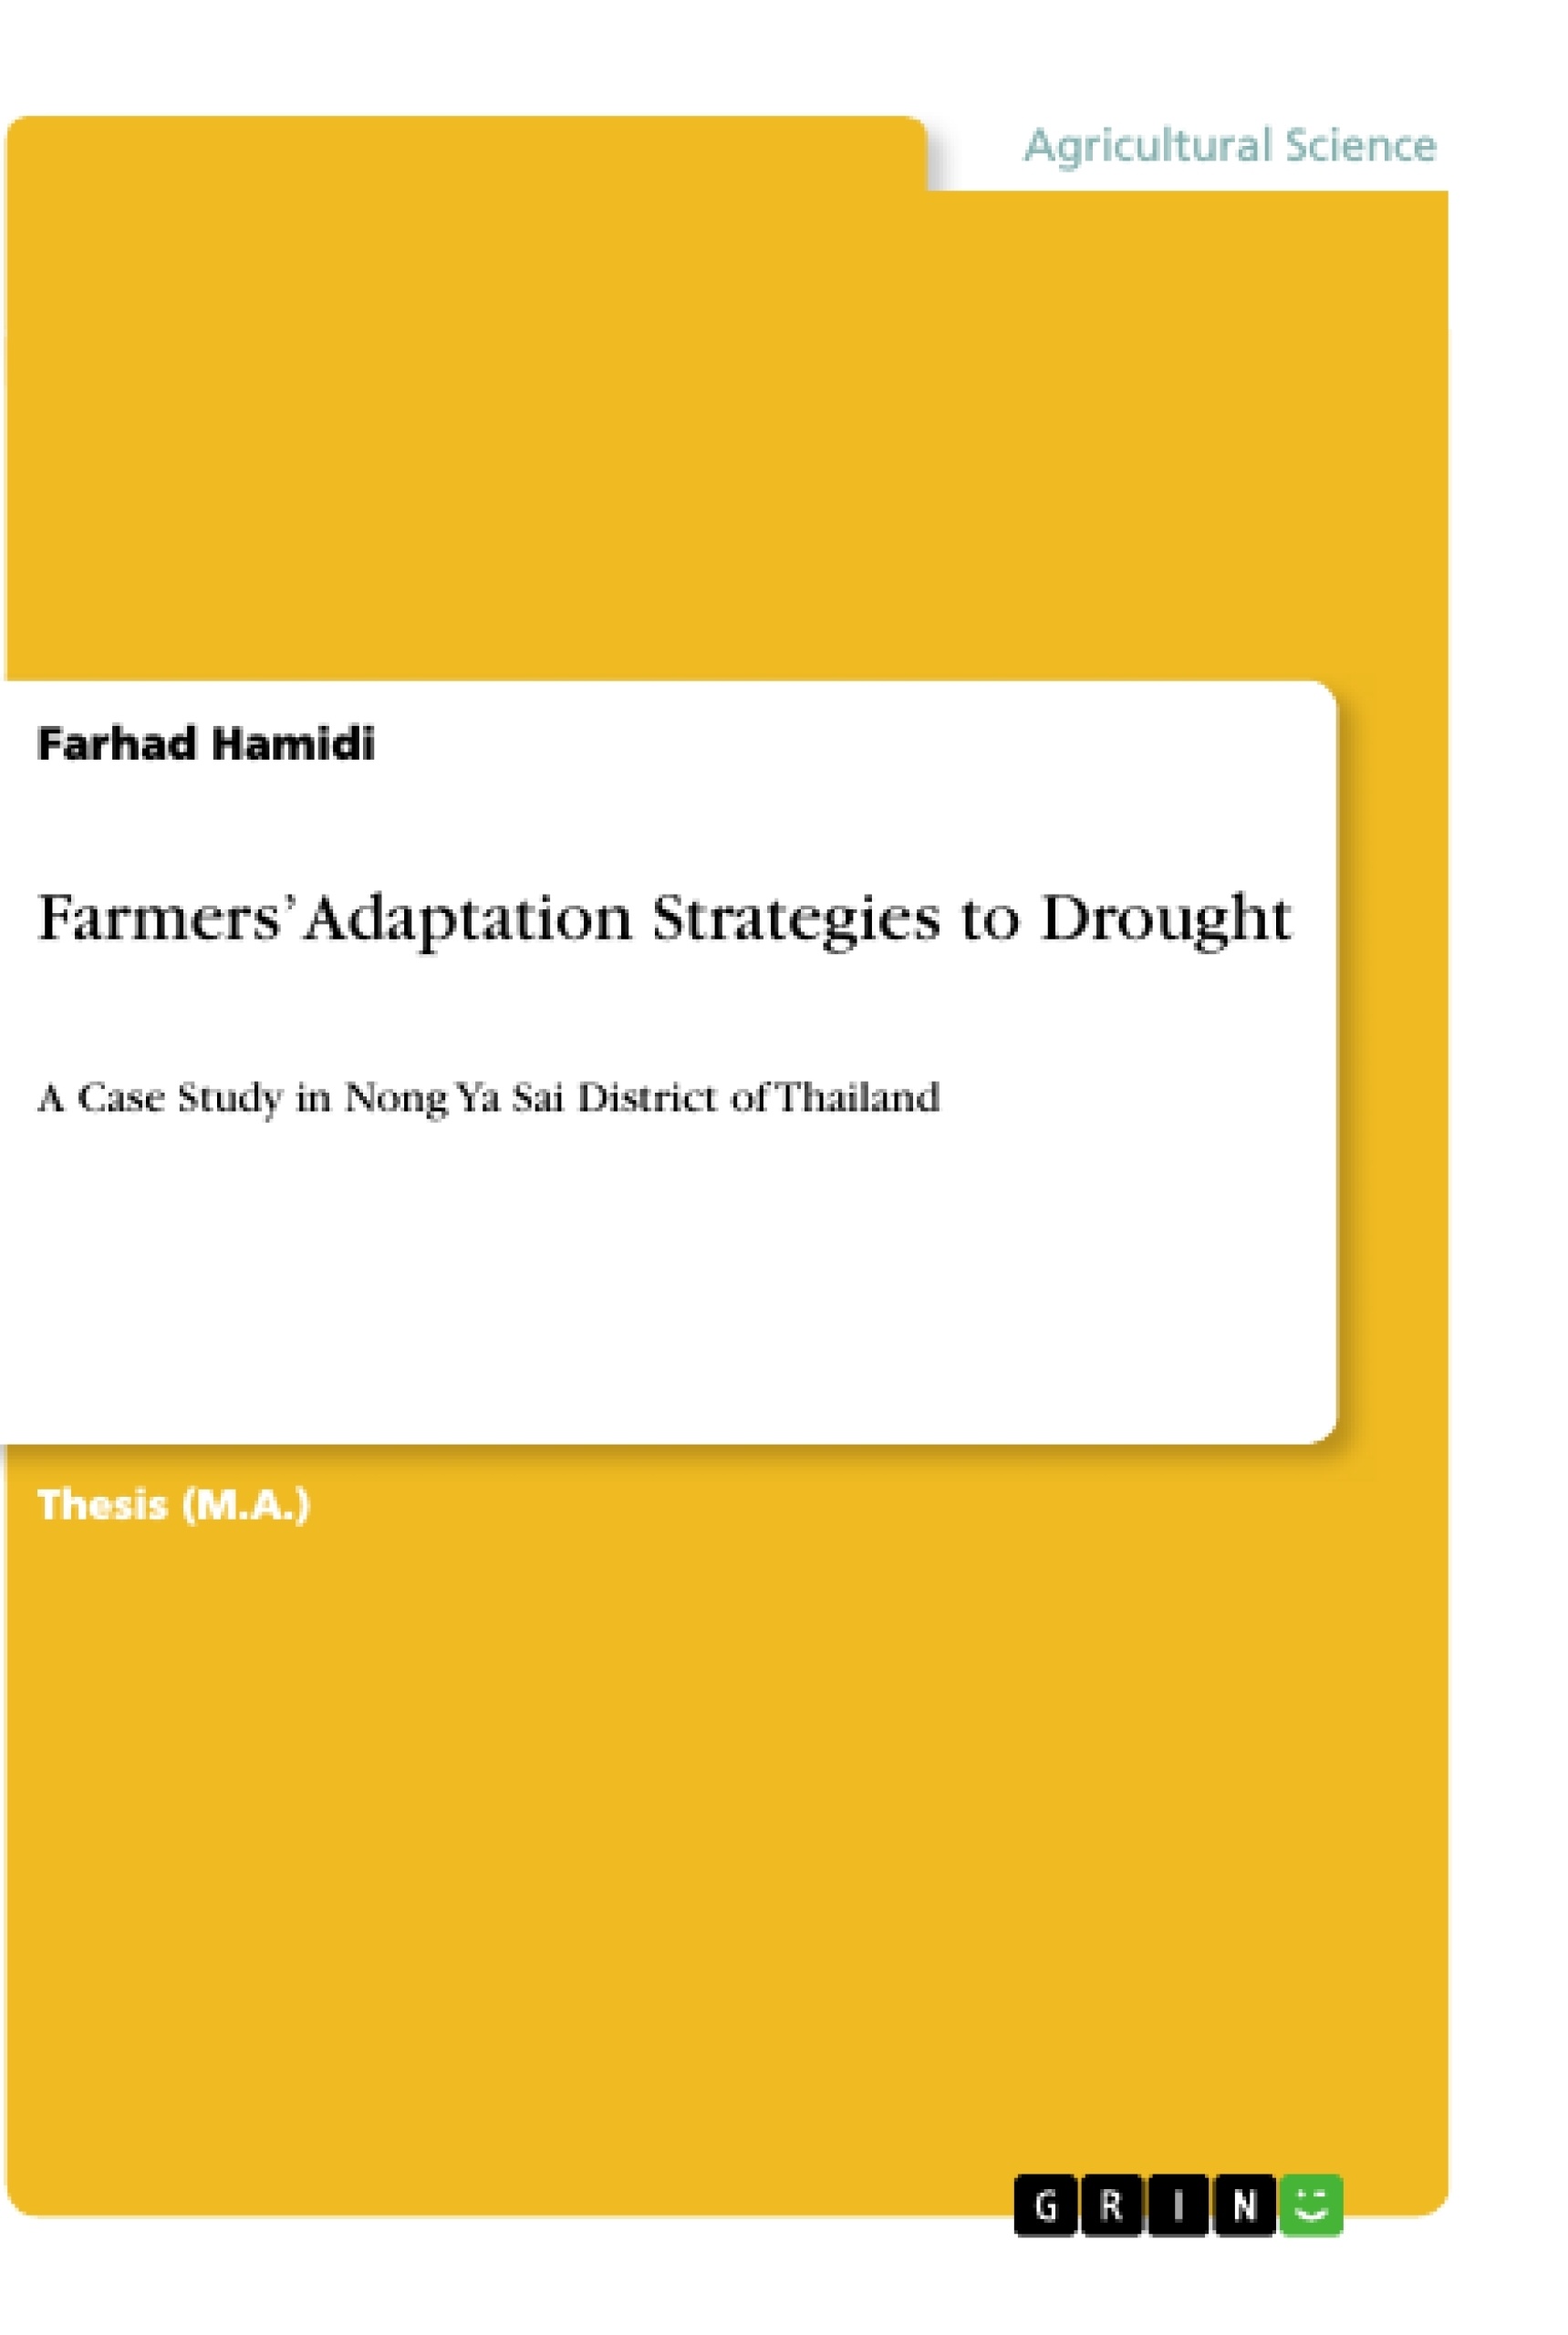 Title: Farmers’ Adaptation Strategies to Drought